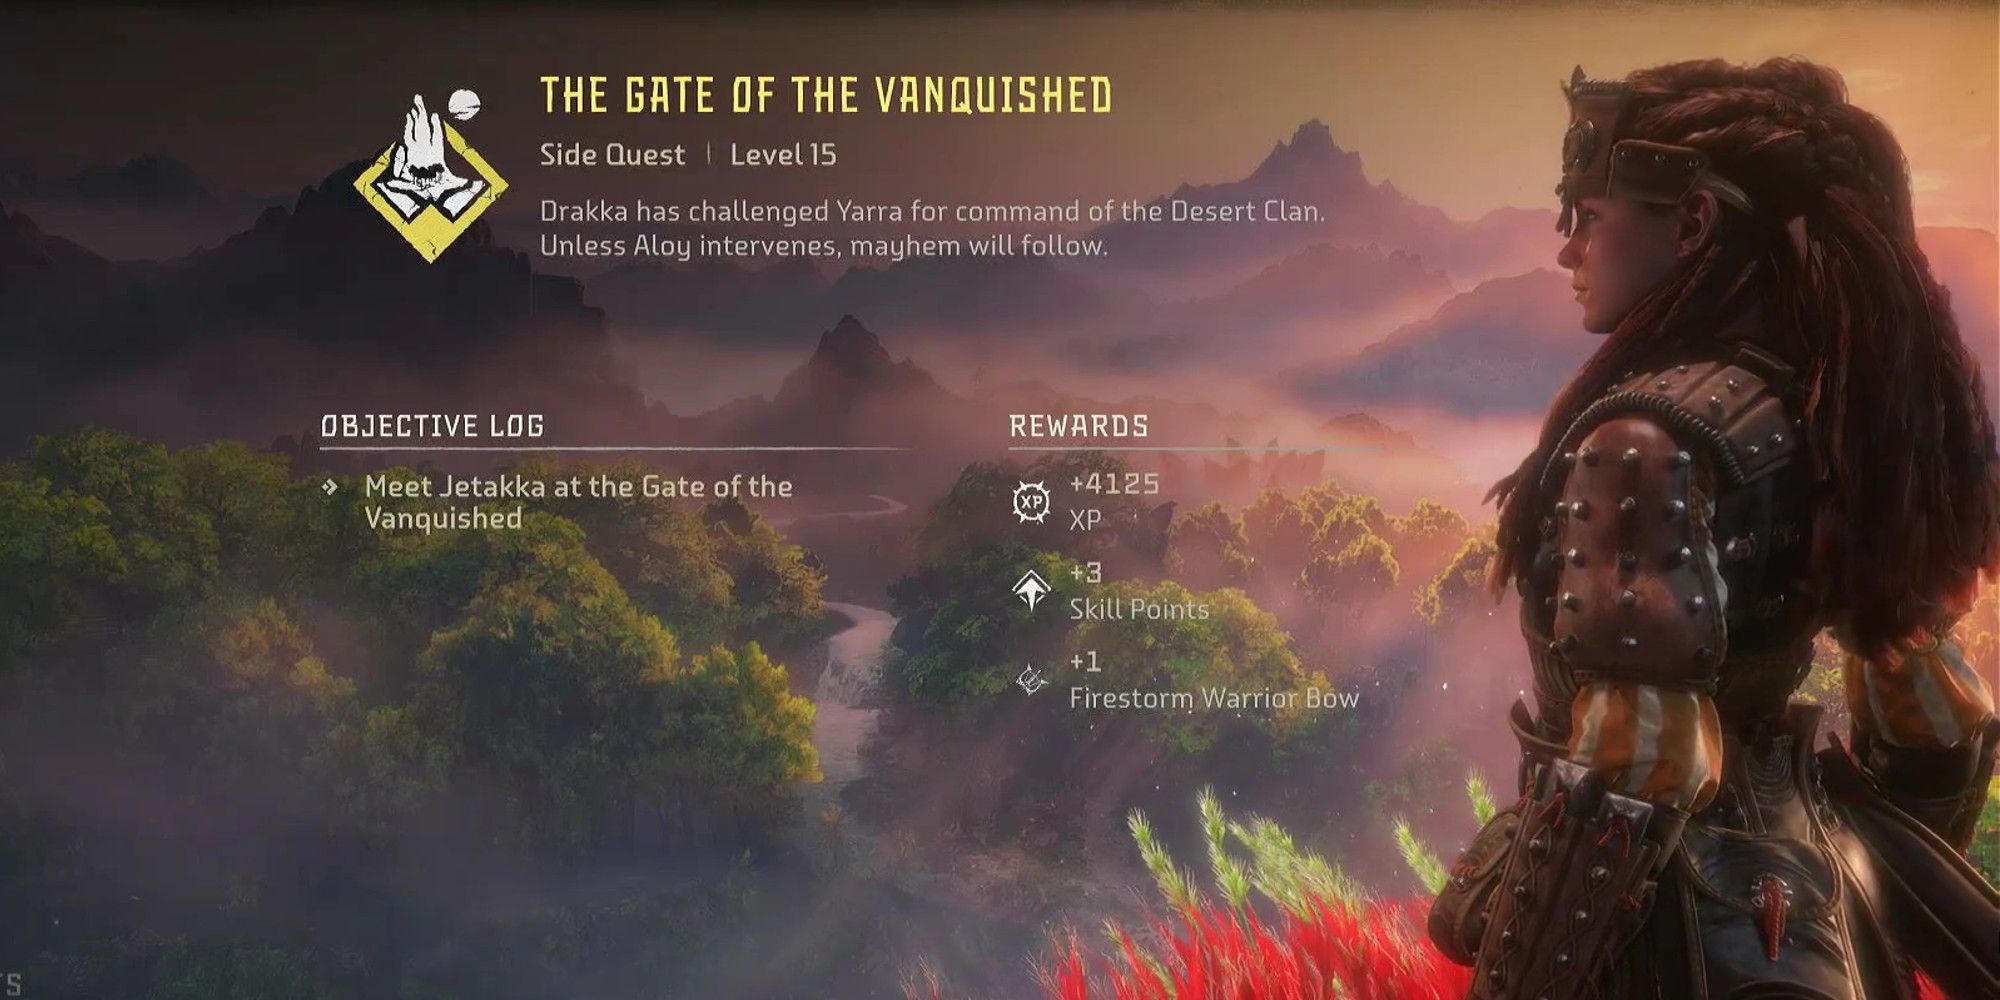 Horizon Forbidden West The Gate of the Vanquished Side Quest